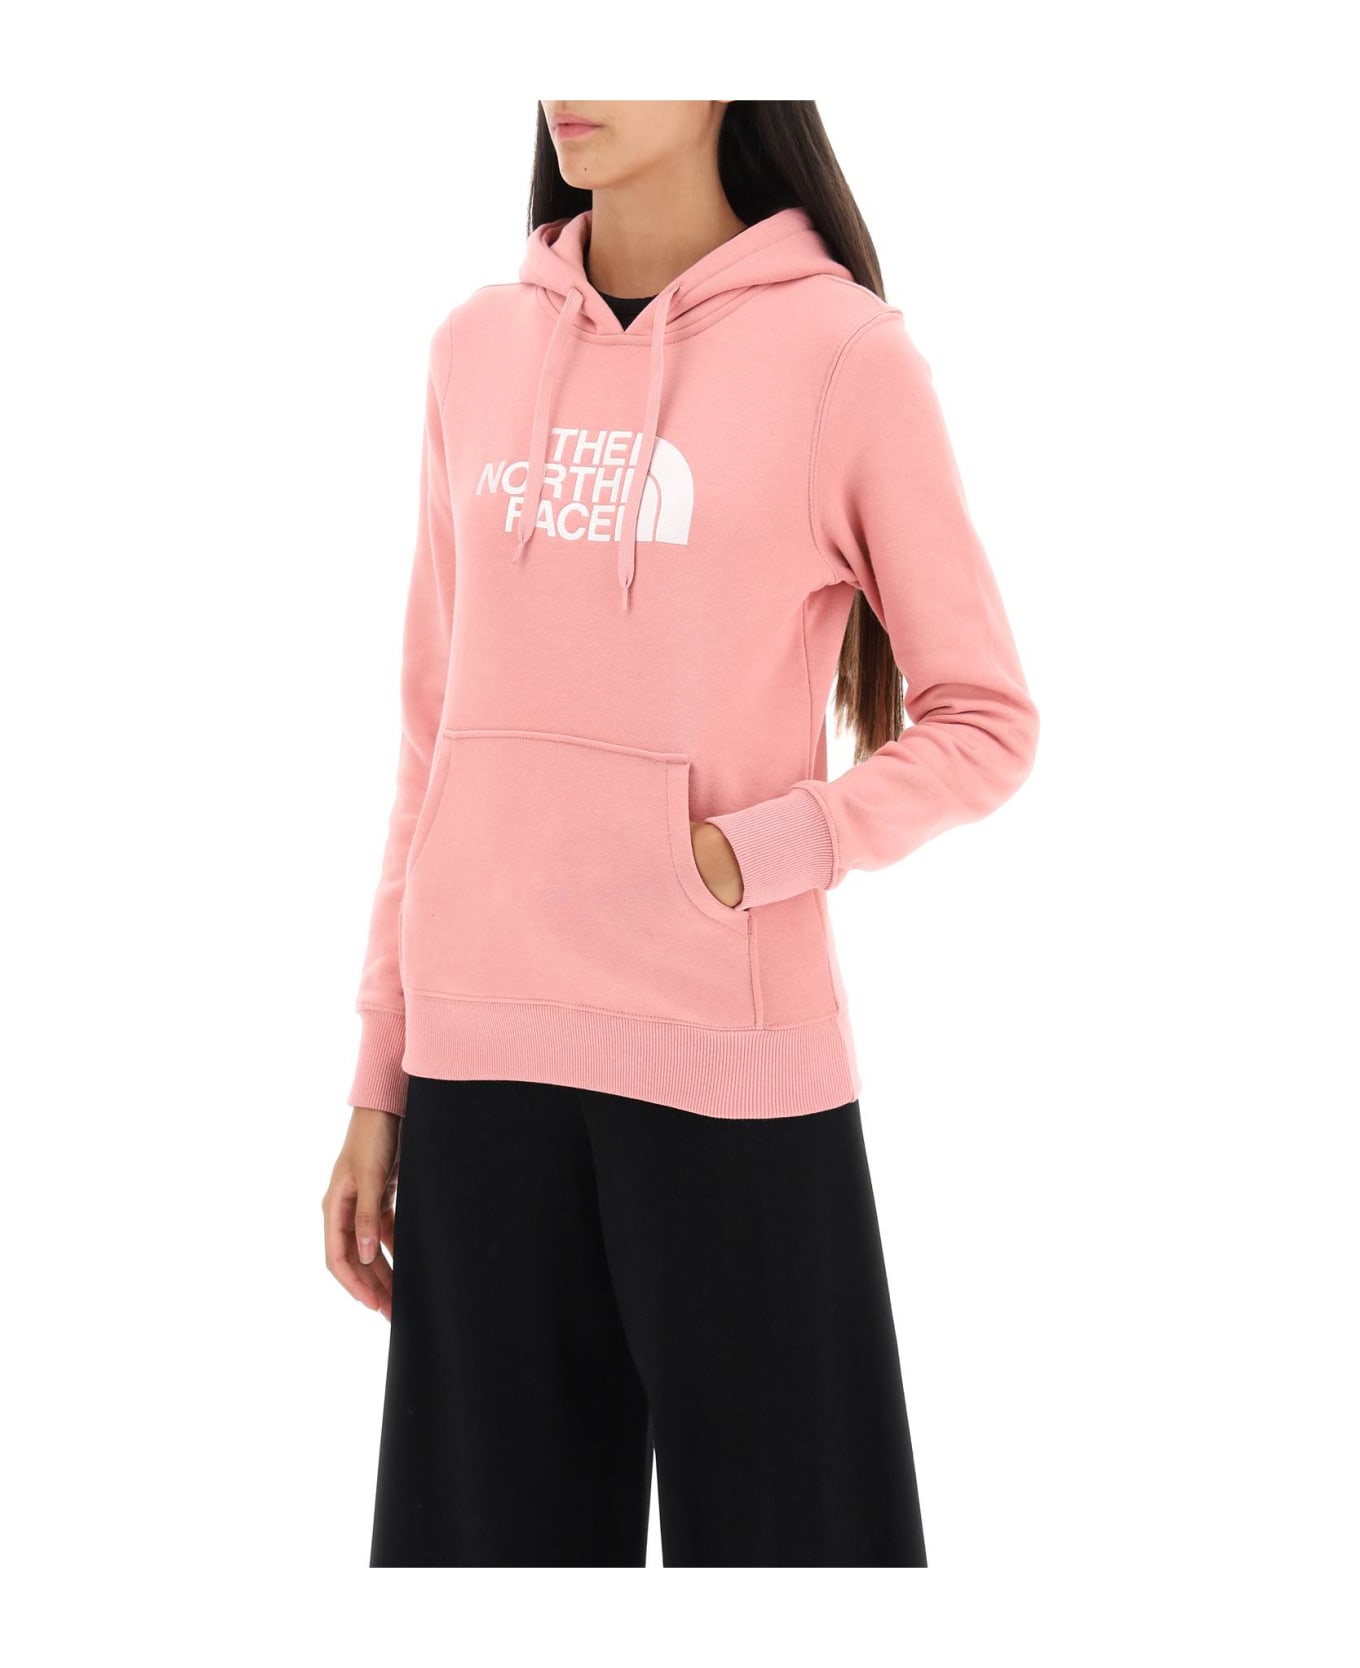 The North Face 'drew Peak' Hoodie With Logo Embroidery - SHADY ROSE (Pink)